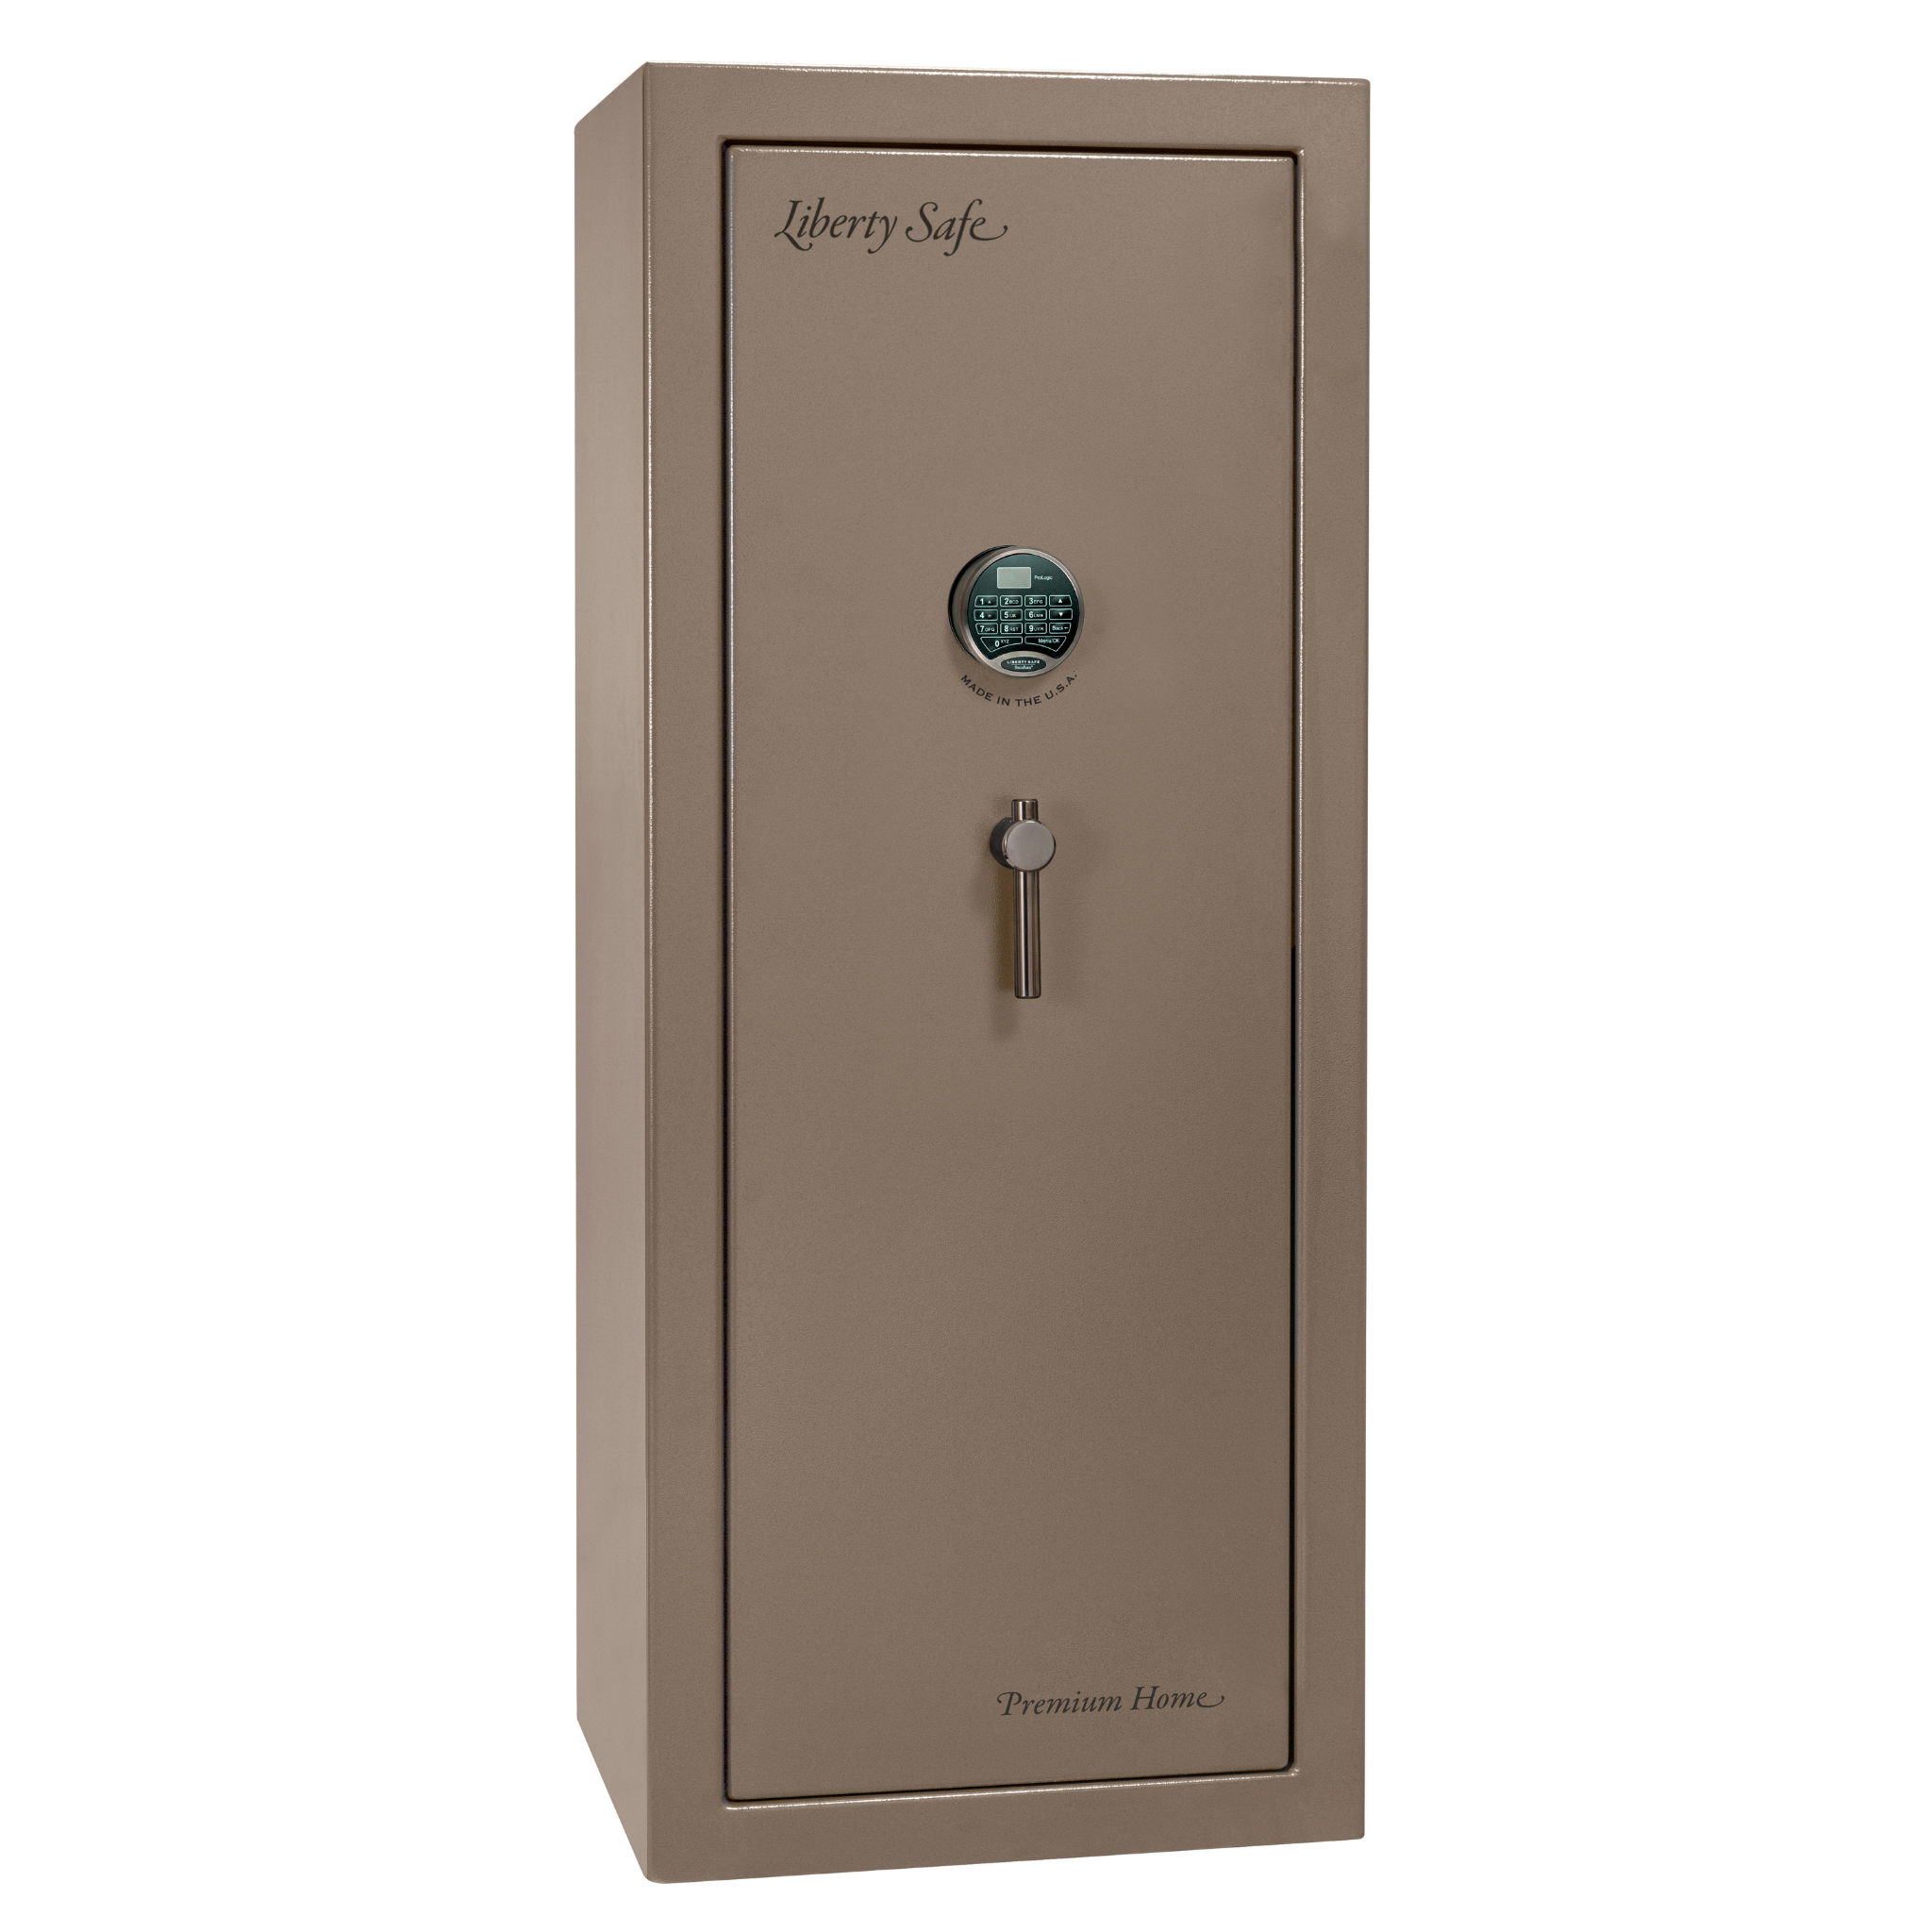 Premium Home Series | Level 7 Security | 2 Hour Fire Protection | 17 | Dimensions: 60.25"(H) x 24.5"(W) x 19"(D) | Champagne Marble - Closed Door